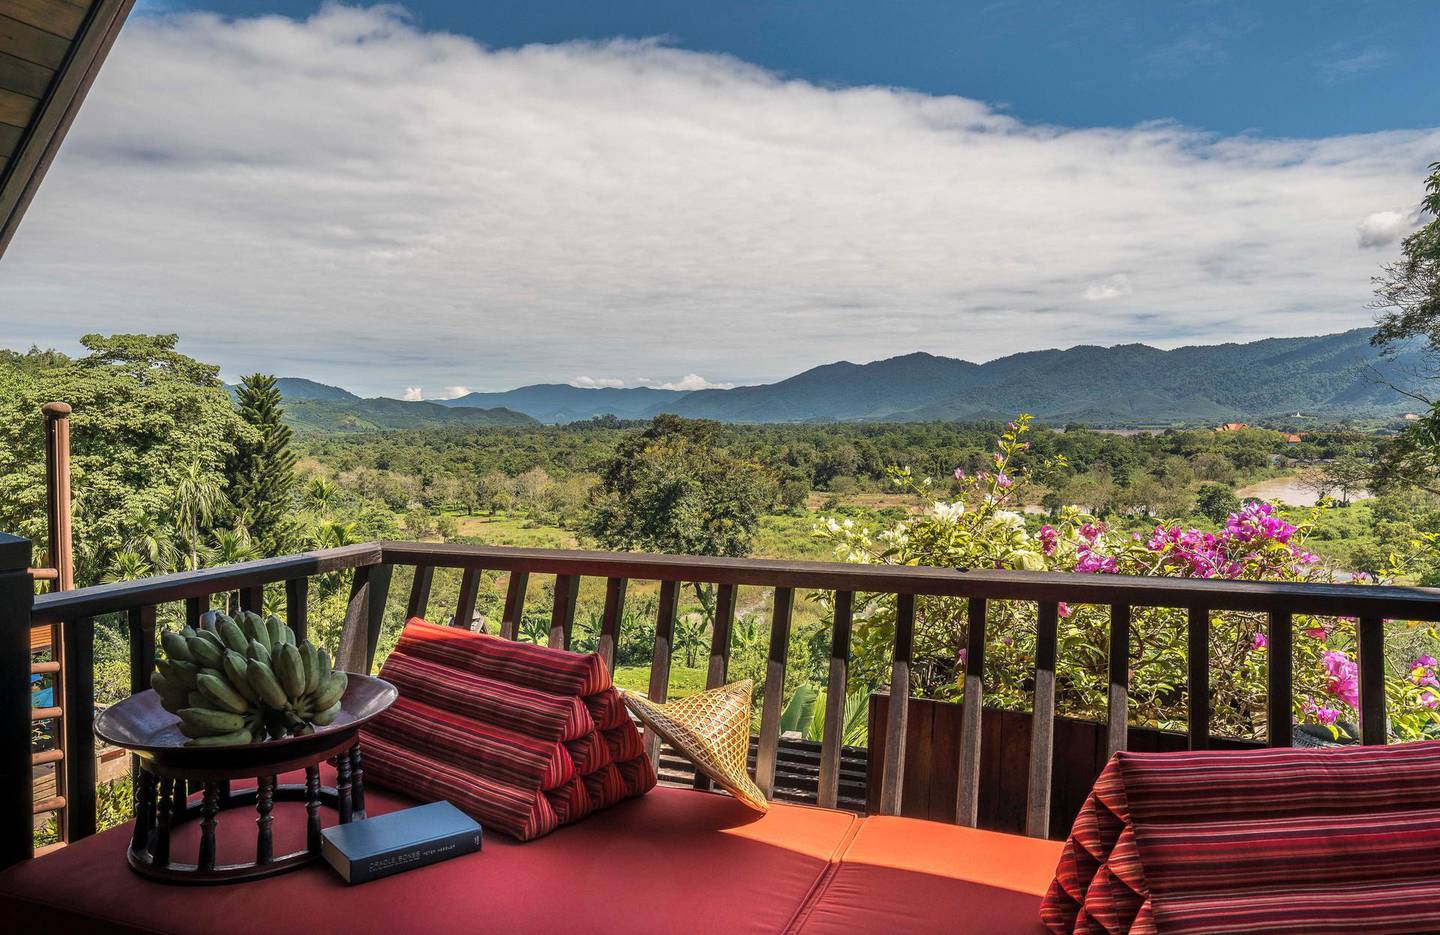 A three country view deluxe room offers just that, views of Laos, Myanmar and Thailand. Anantara